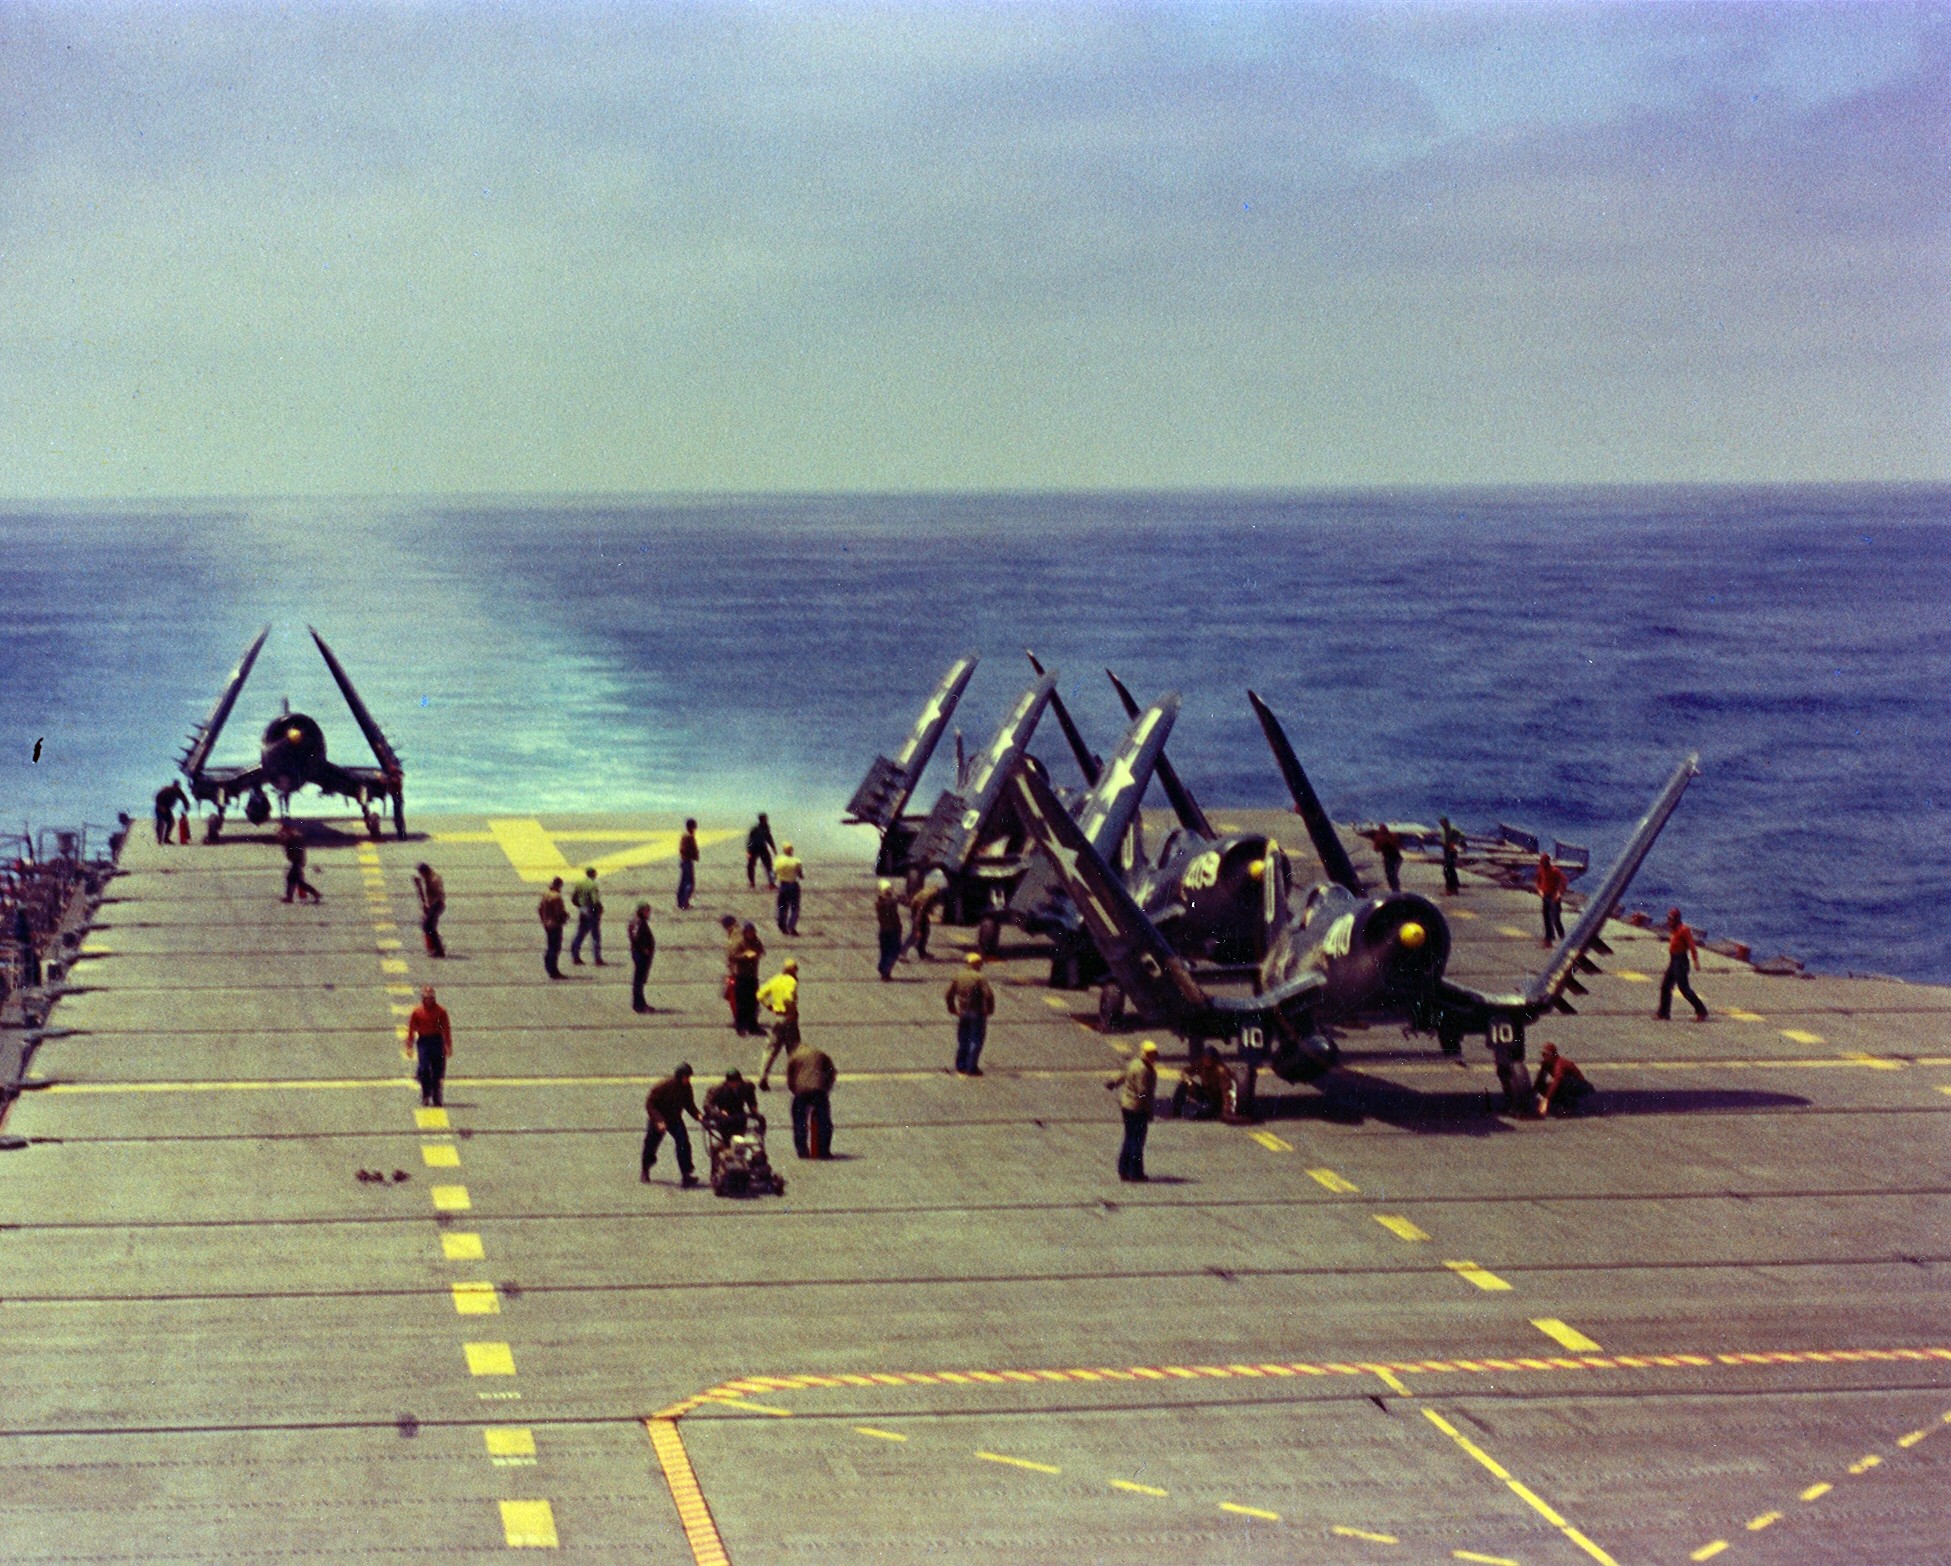 F4U-4 Corsair fighters of US Navy squadron VF-874 aboard USS Oriskany off southern California, United States, 15 Aug 1952